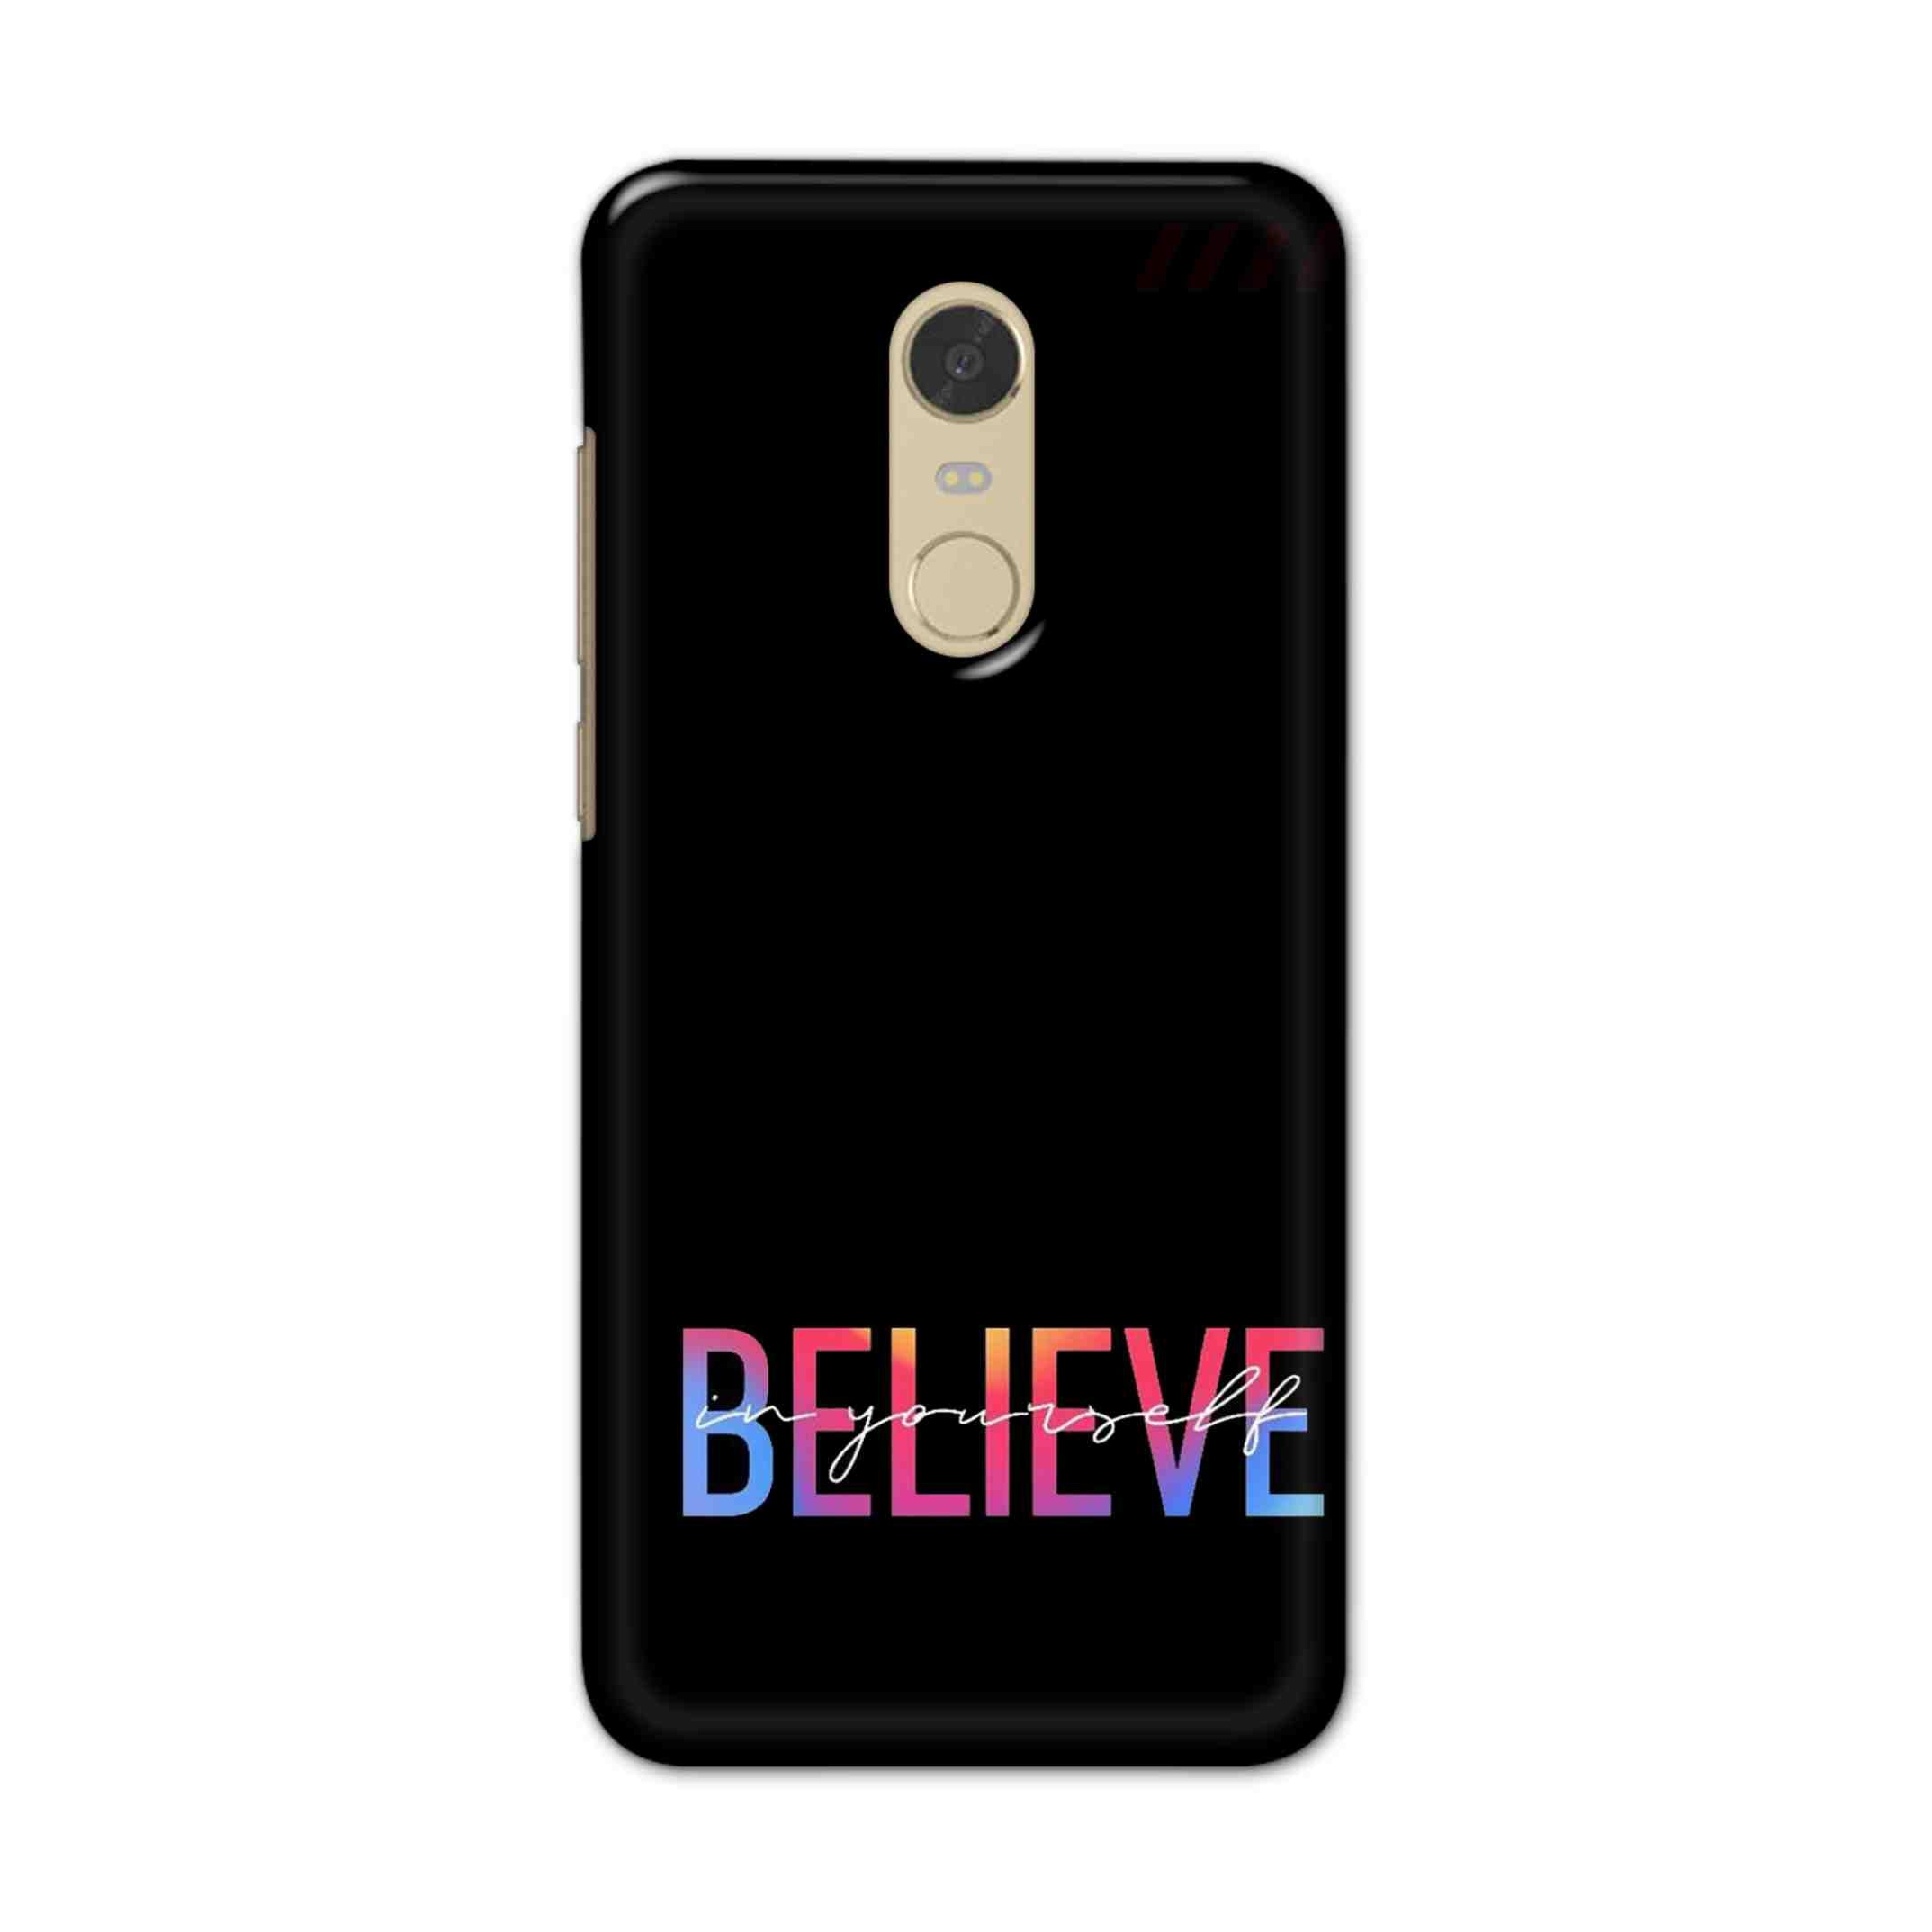 Buy Believe Hard Back Mobile Phone Case/Cover For Redmi Note 6 Online